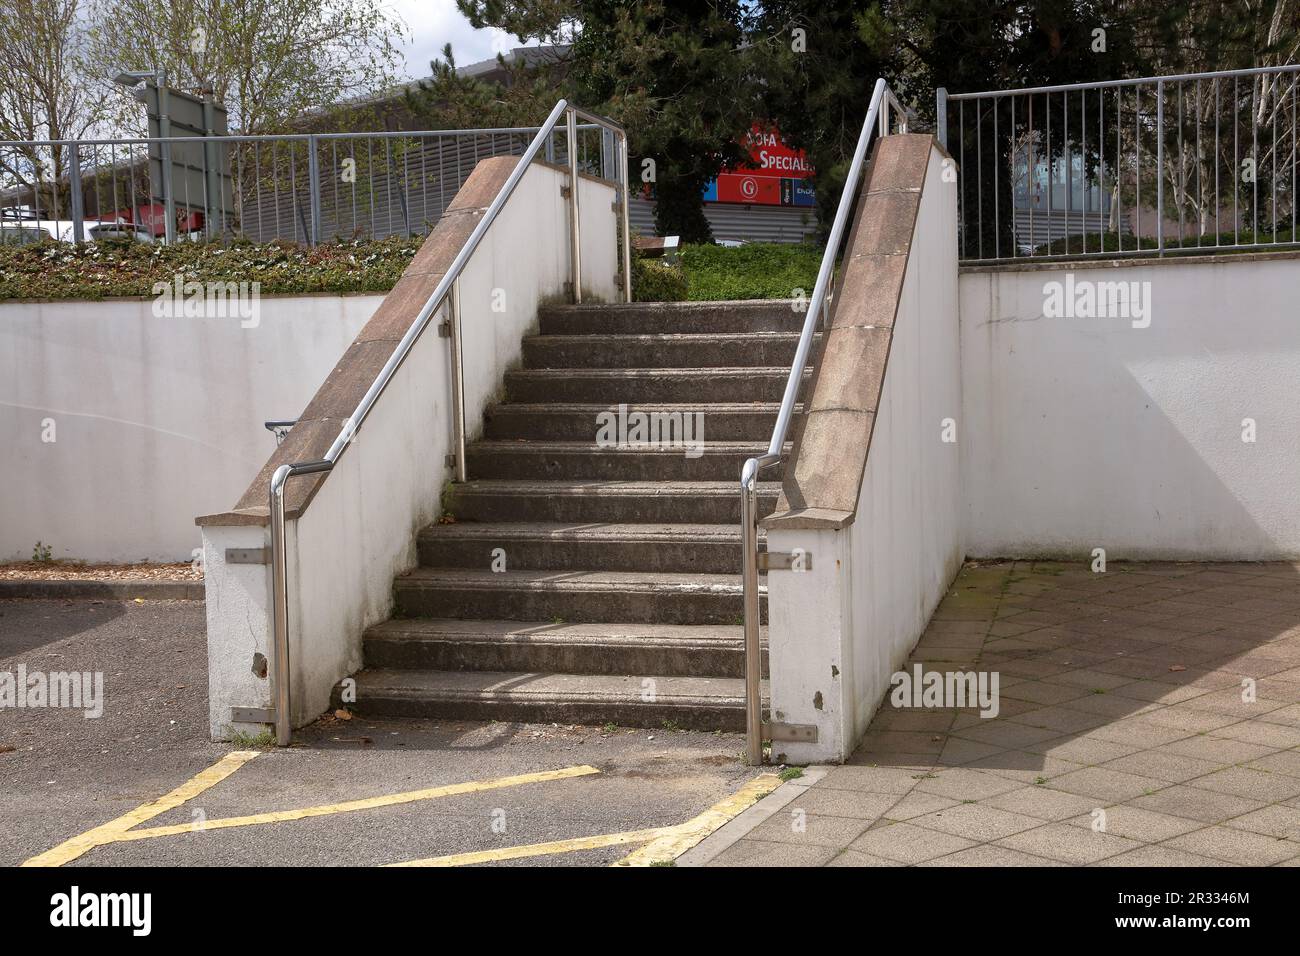 A set of Concrete steps allowing access between stores in the industrial area of Bridgend across a very busy roadway. Stock Photo